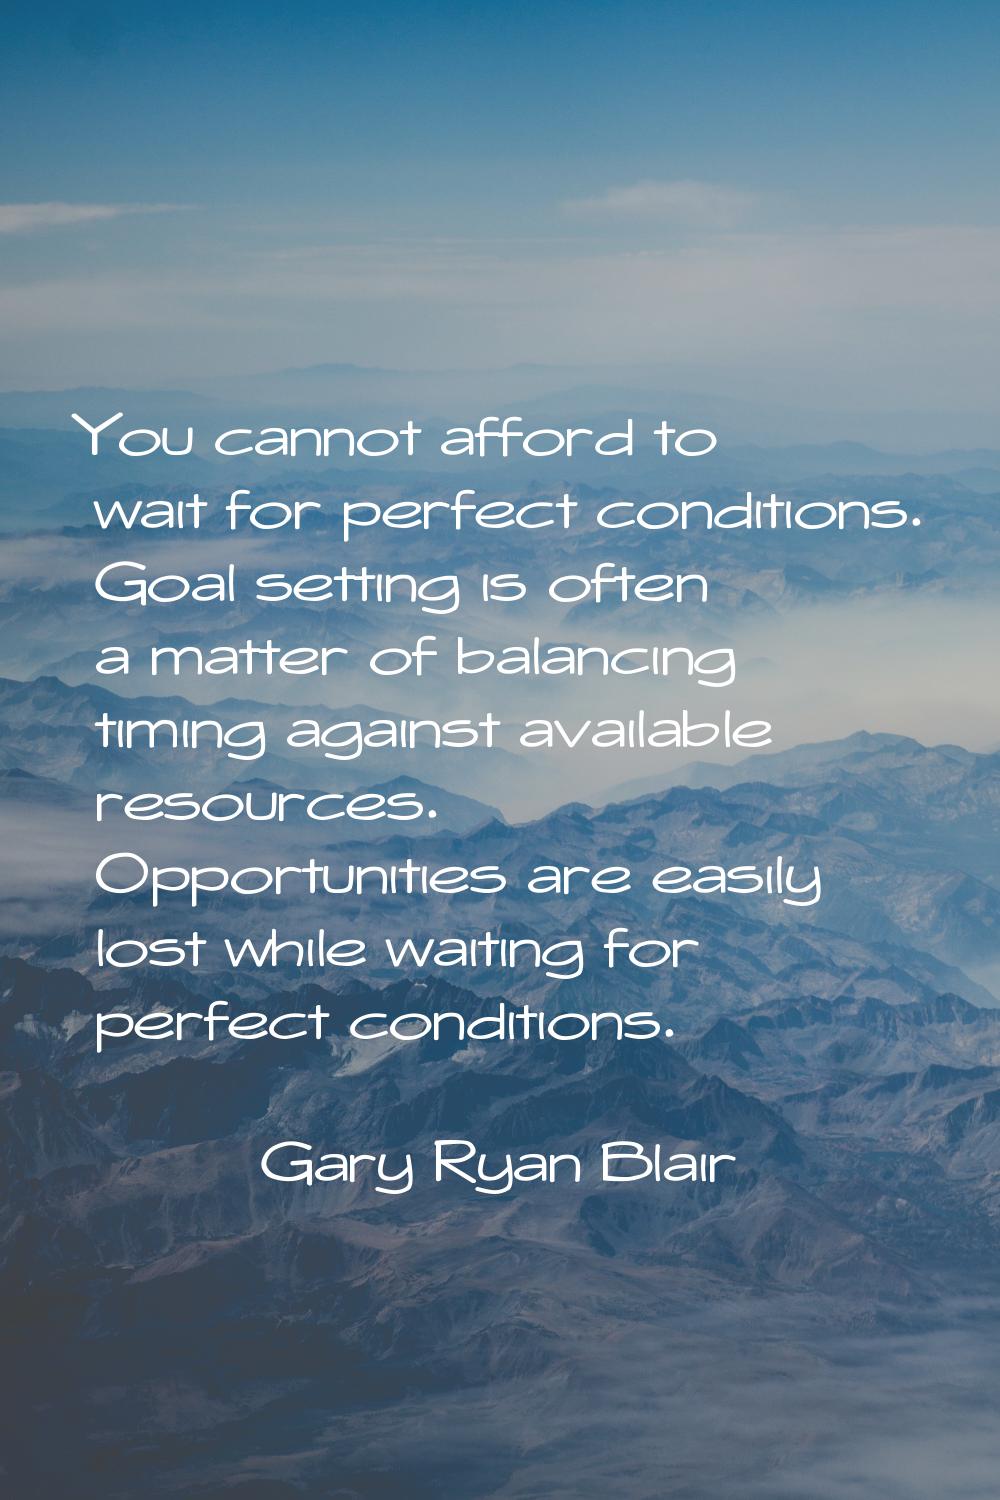 You cannot afford to wait for perfect conditions. Goal setting is often a matter of balancing timin